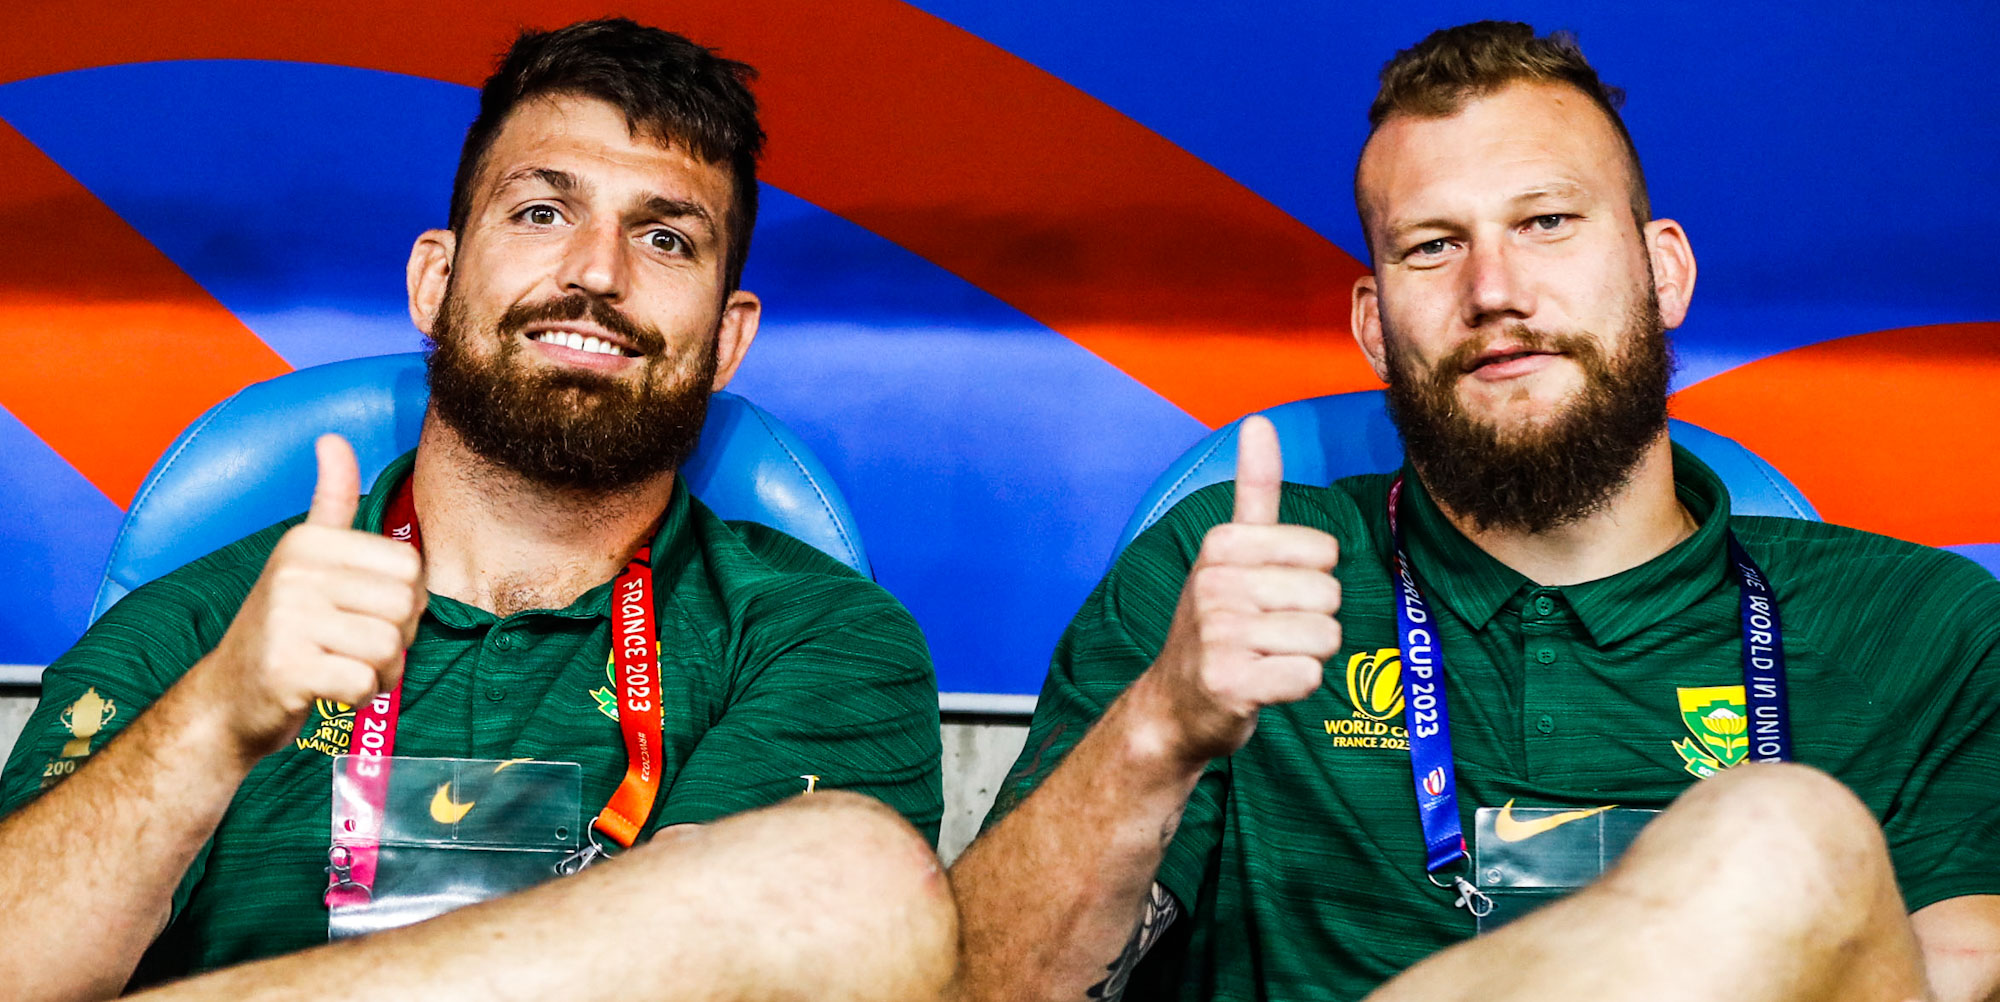 Jean Kleyn and RG Snyman are the lock replacements for the RWC final.